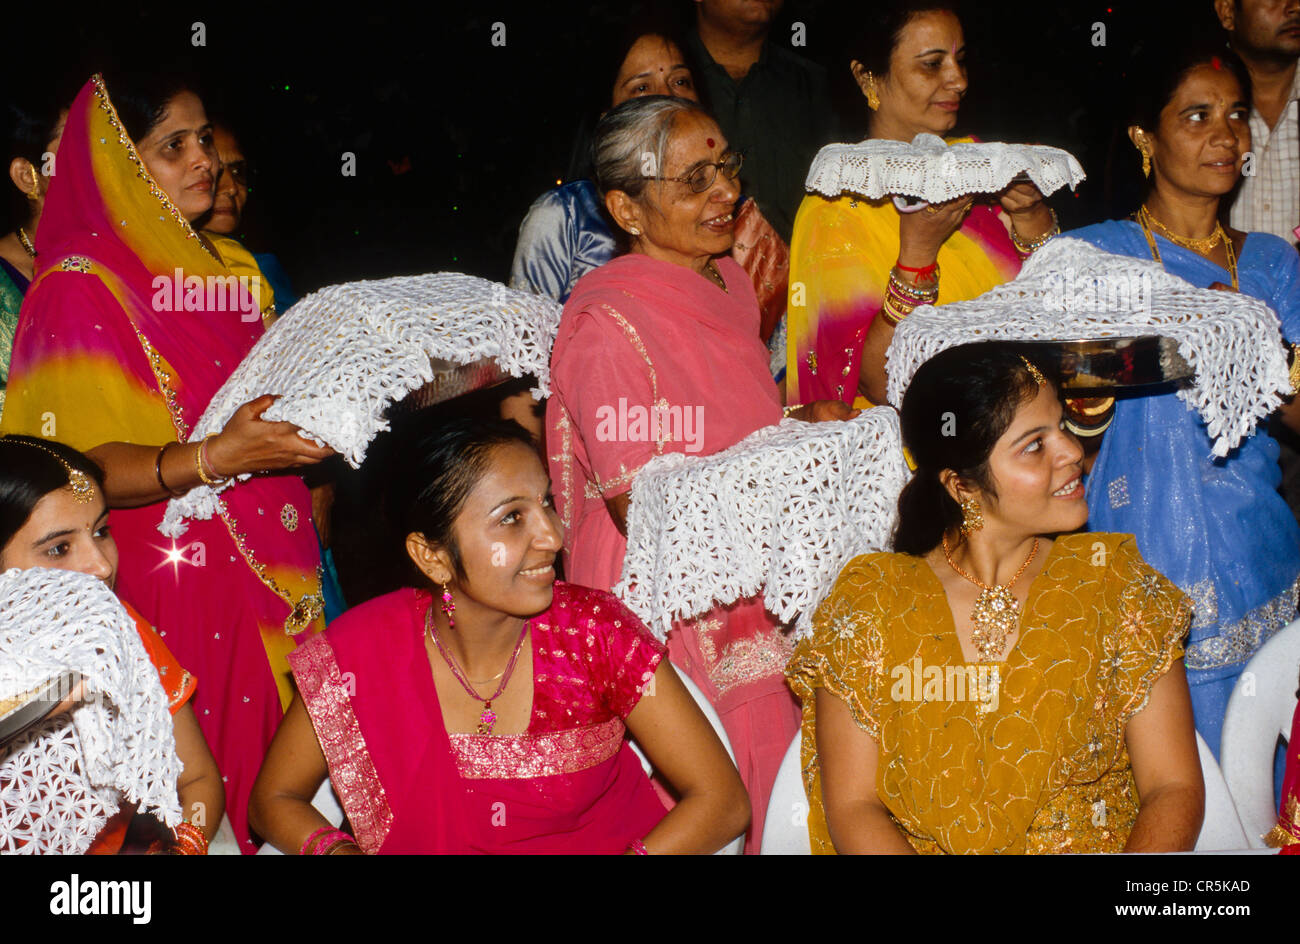 Family members offering presents during a wedding ceremony, Udaipur, Rajasthan, India, Asia Stock Photo